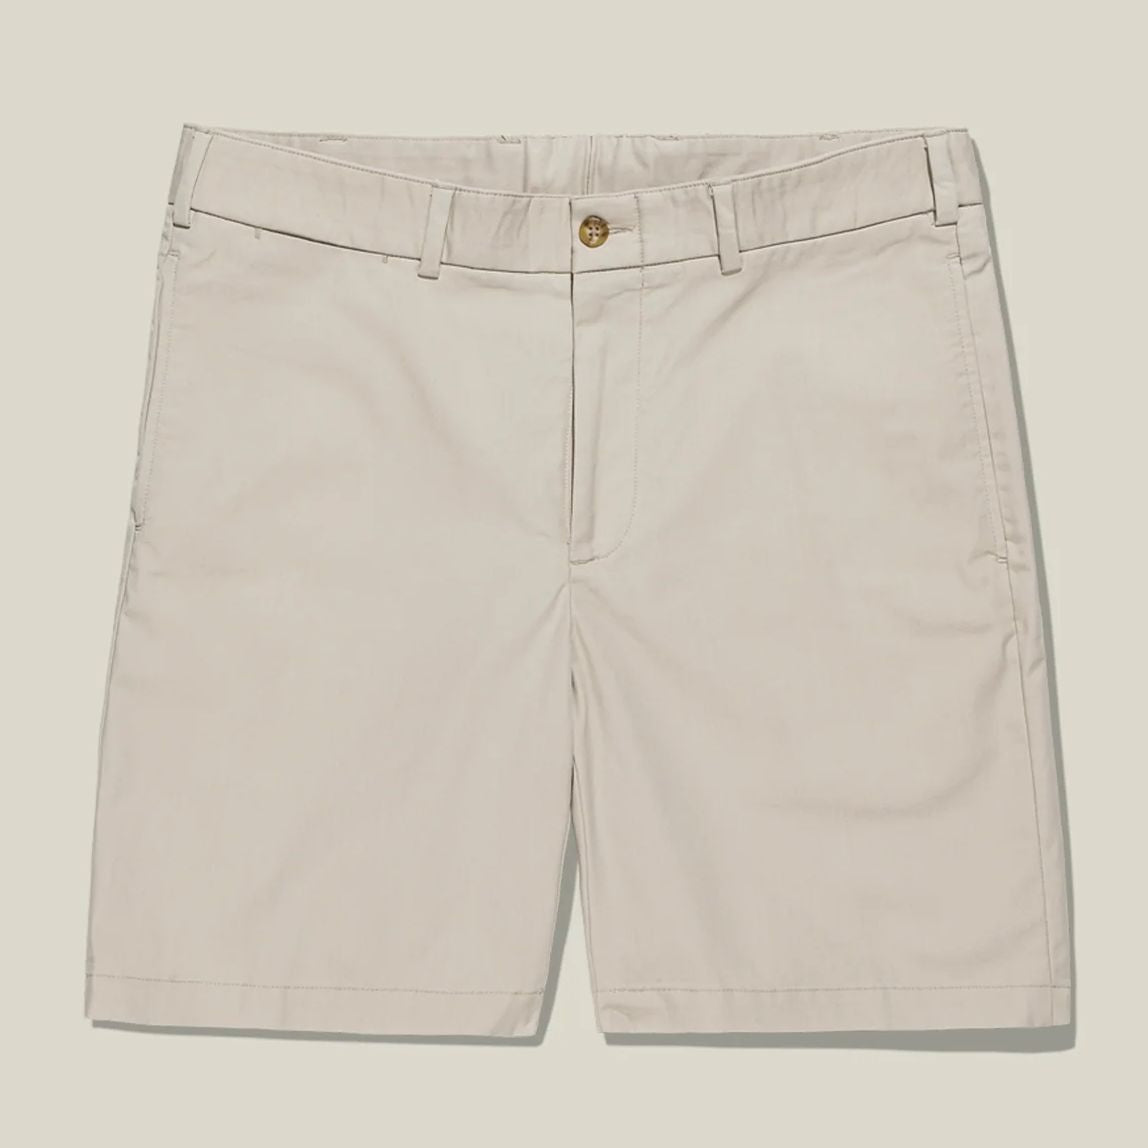 M2 Classic Fit Travel Twill Shorts in Cement by Bills Khakis